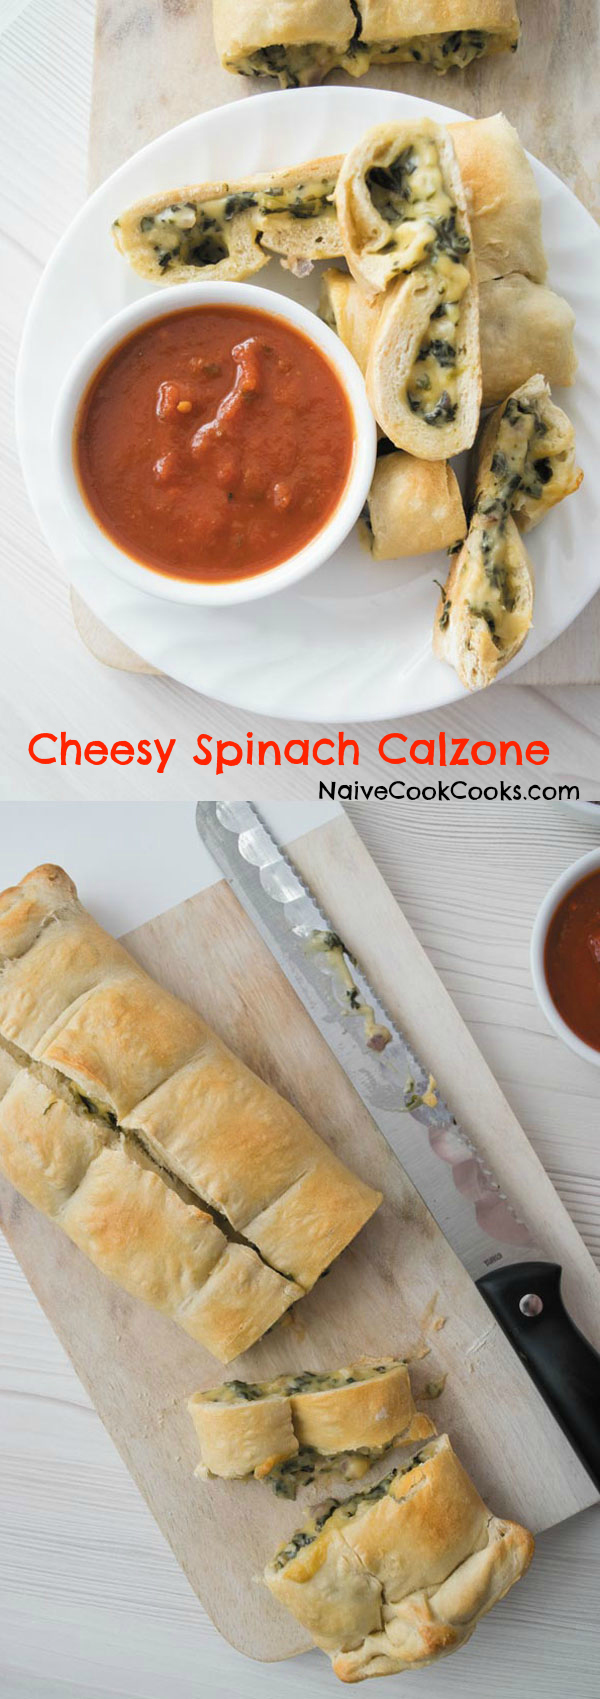 cheesy spinach calzones 1